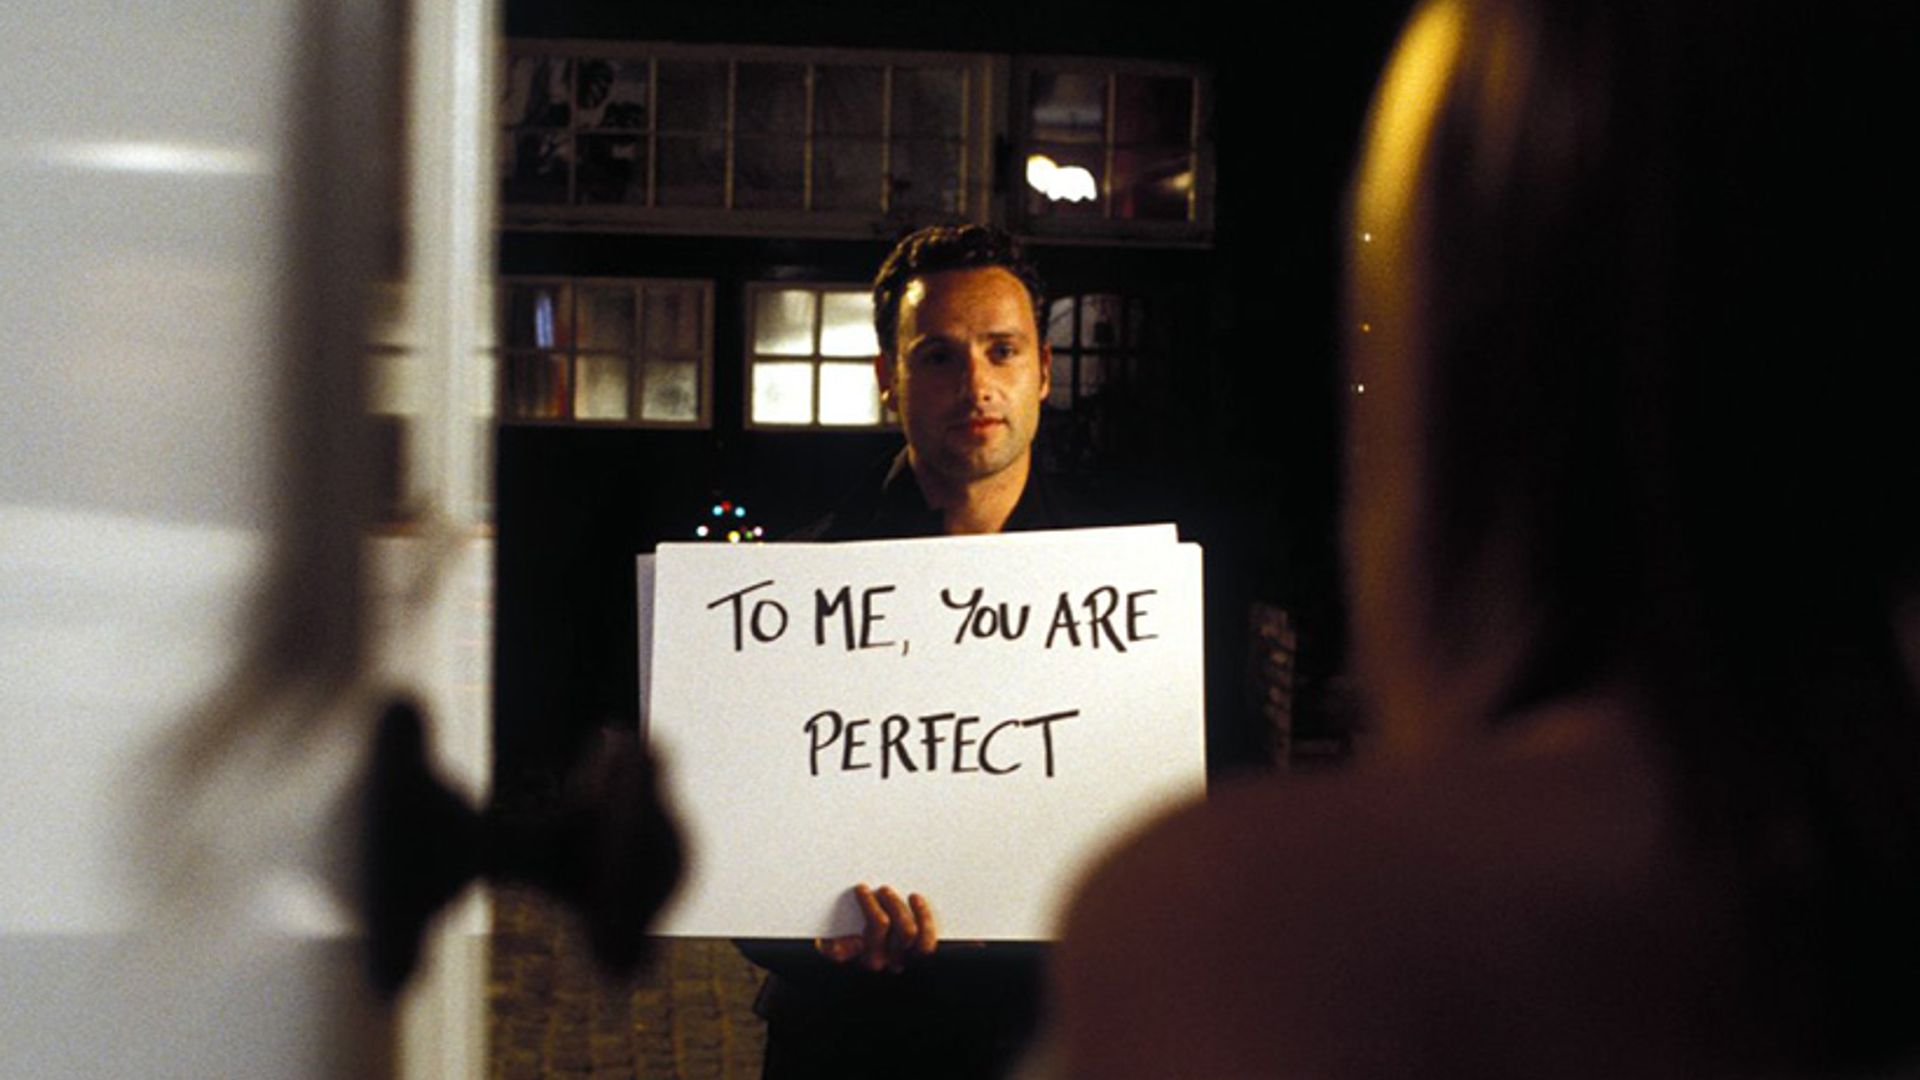 Love Actually sequel: Andrew Lincoln reunites with 'best friend' Chiwetel Ejiofor